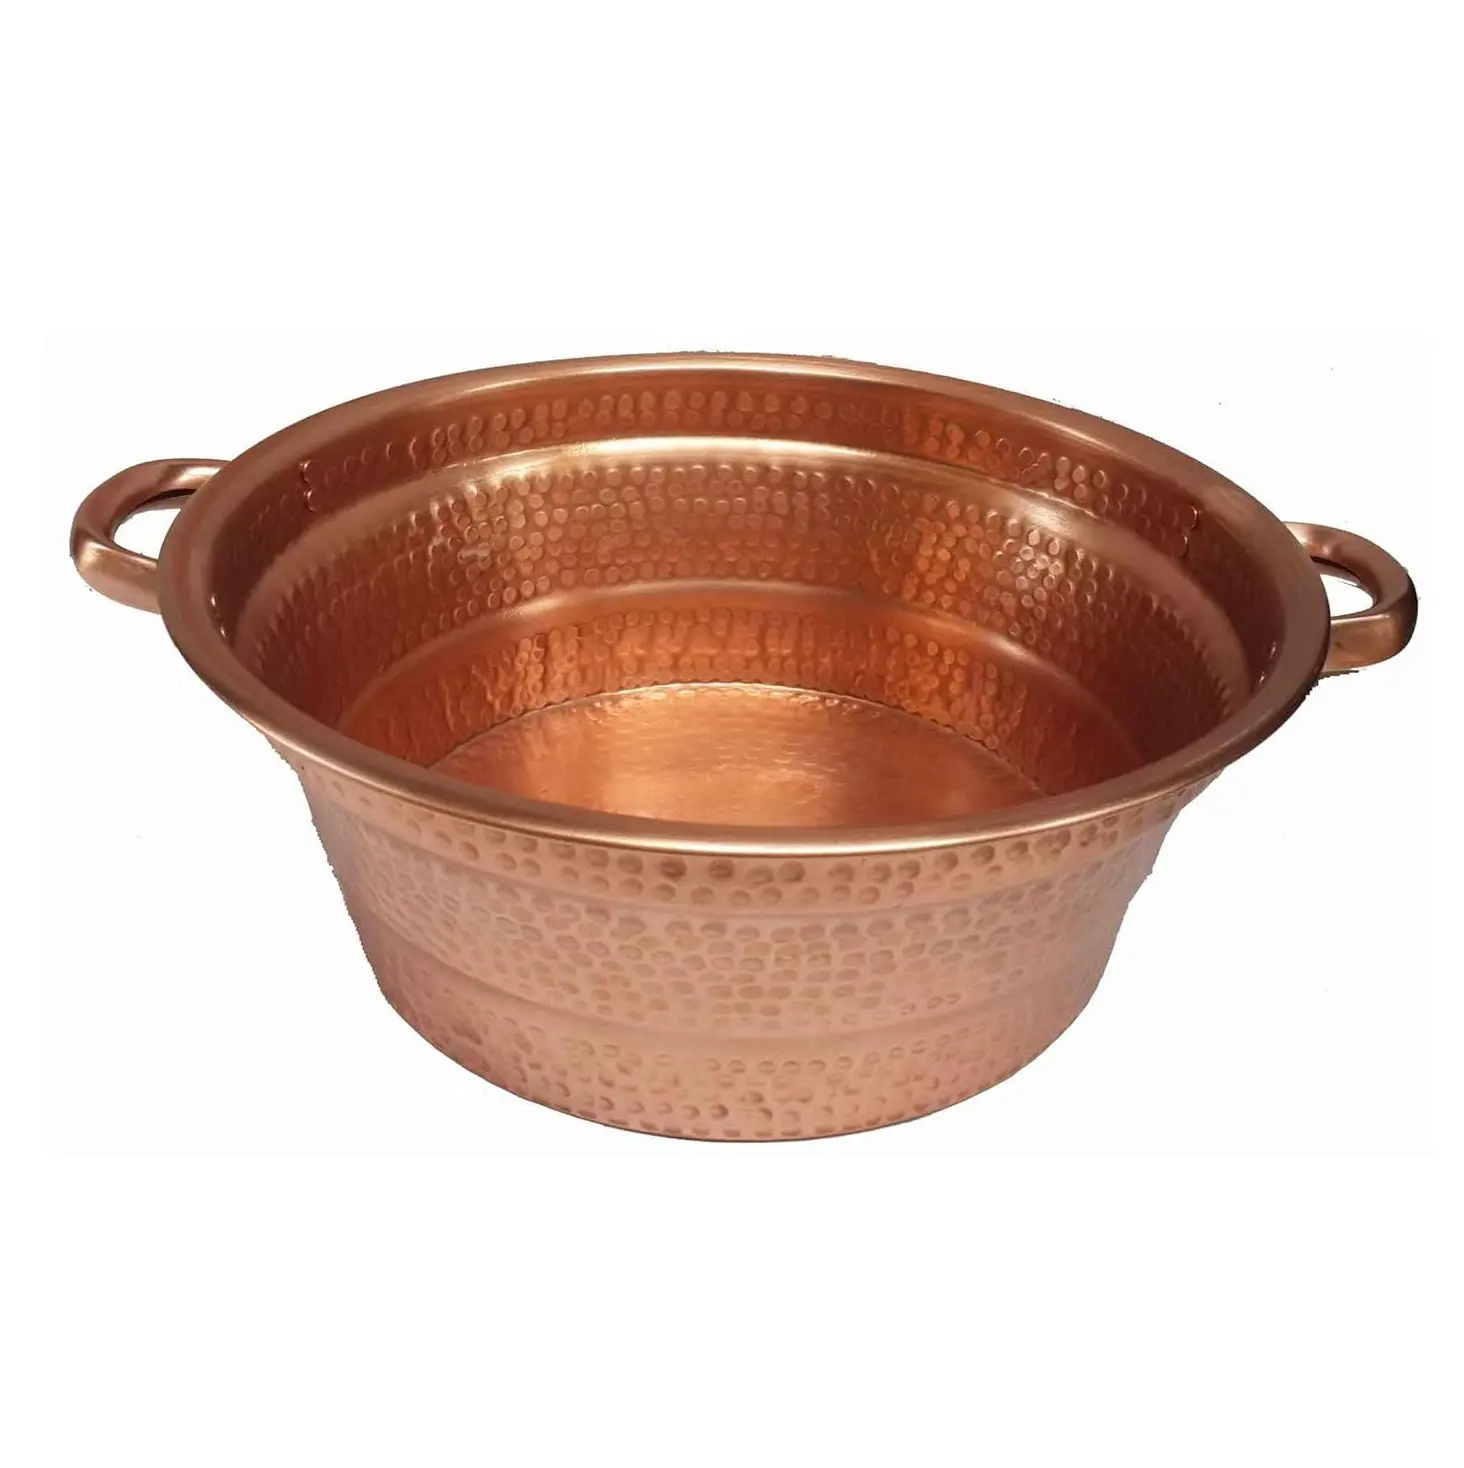 High Quality Copper Pedicure Bowl for Foot Spa available at Affordable Price with Custom Size from India